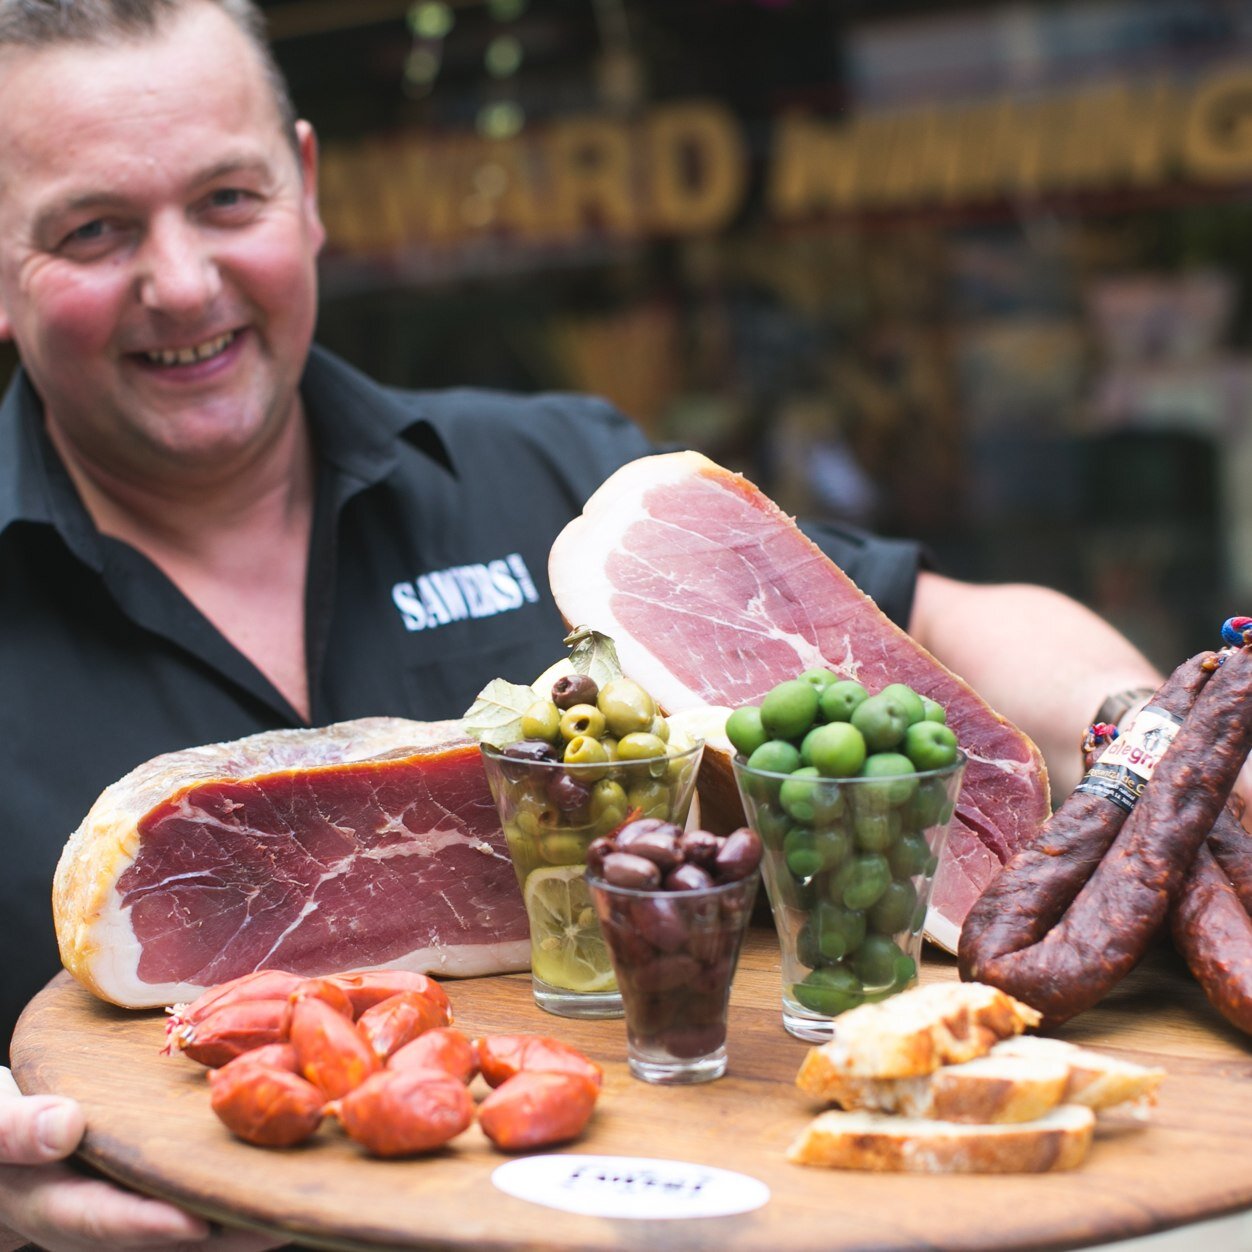 SAWERS LTD SUPPLIERS OF THE WORLDS FINEST FOODS SINCE 1897 . WITH THE LARGEST RANGE OF FINE CHEESES, OLIVES SEAFOOD,CHARCUTERIE LOCAL PRODUCE GOURMET HAMPERS.